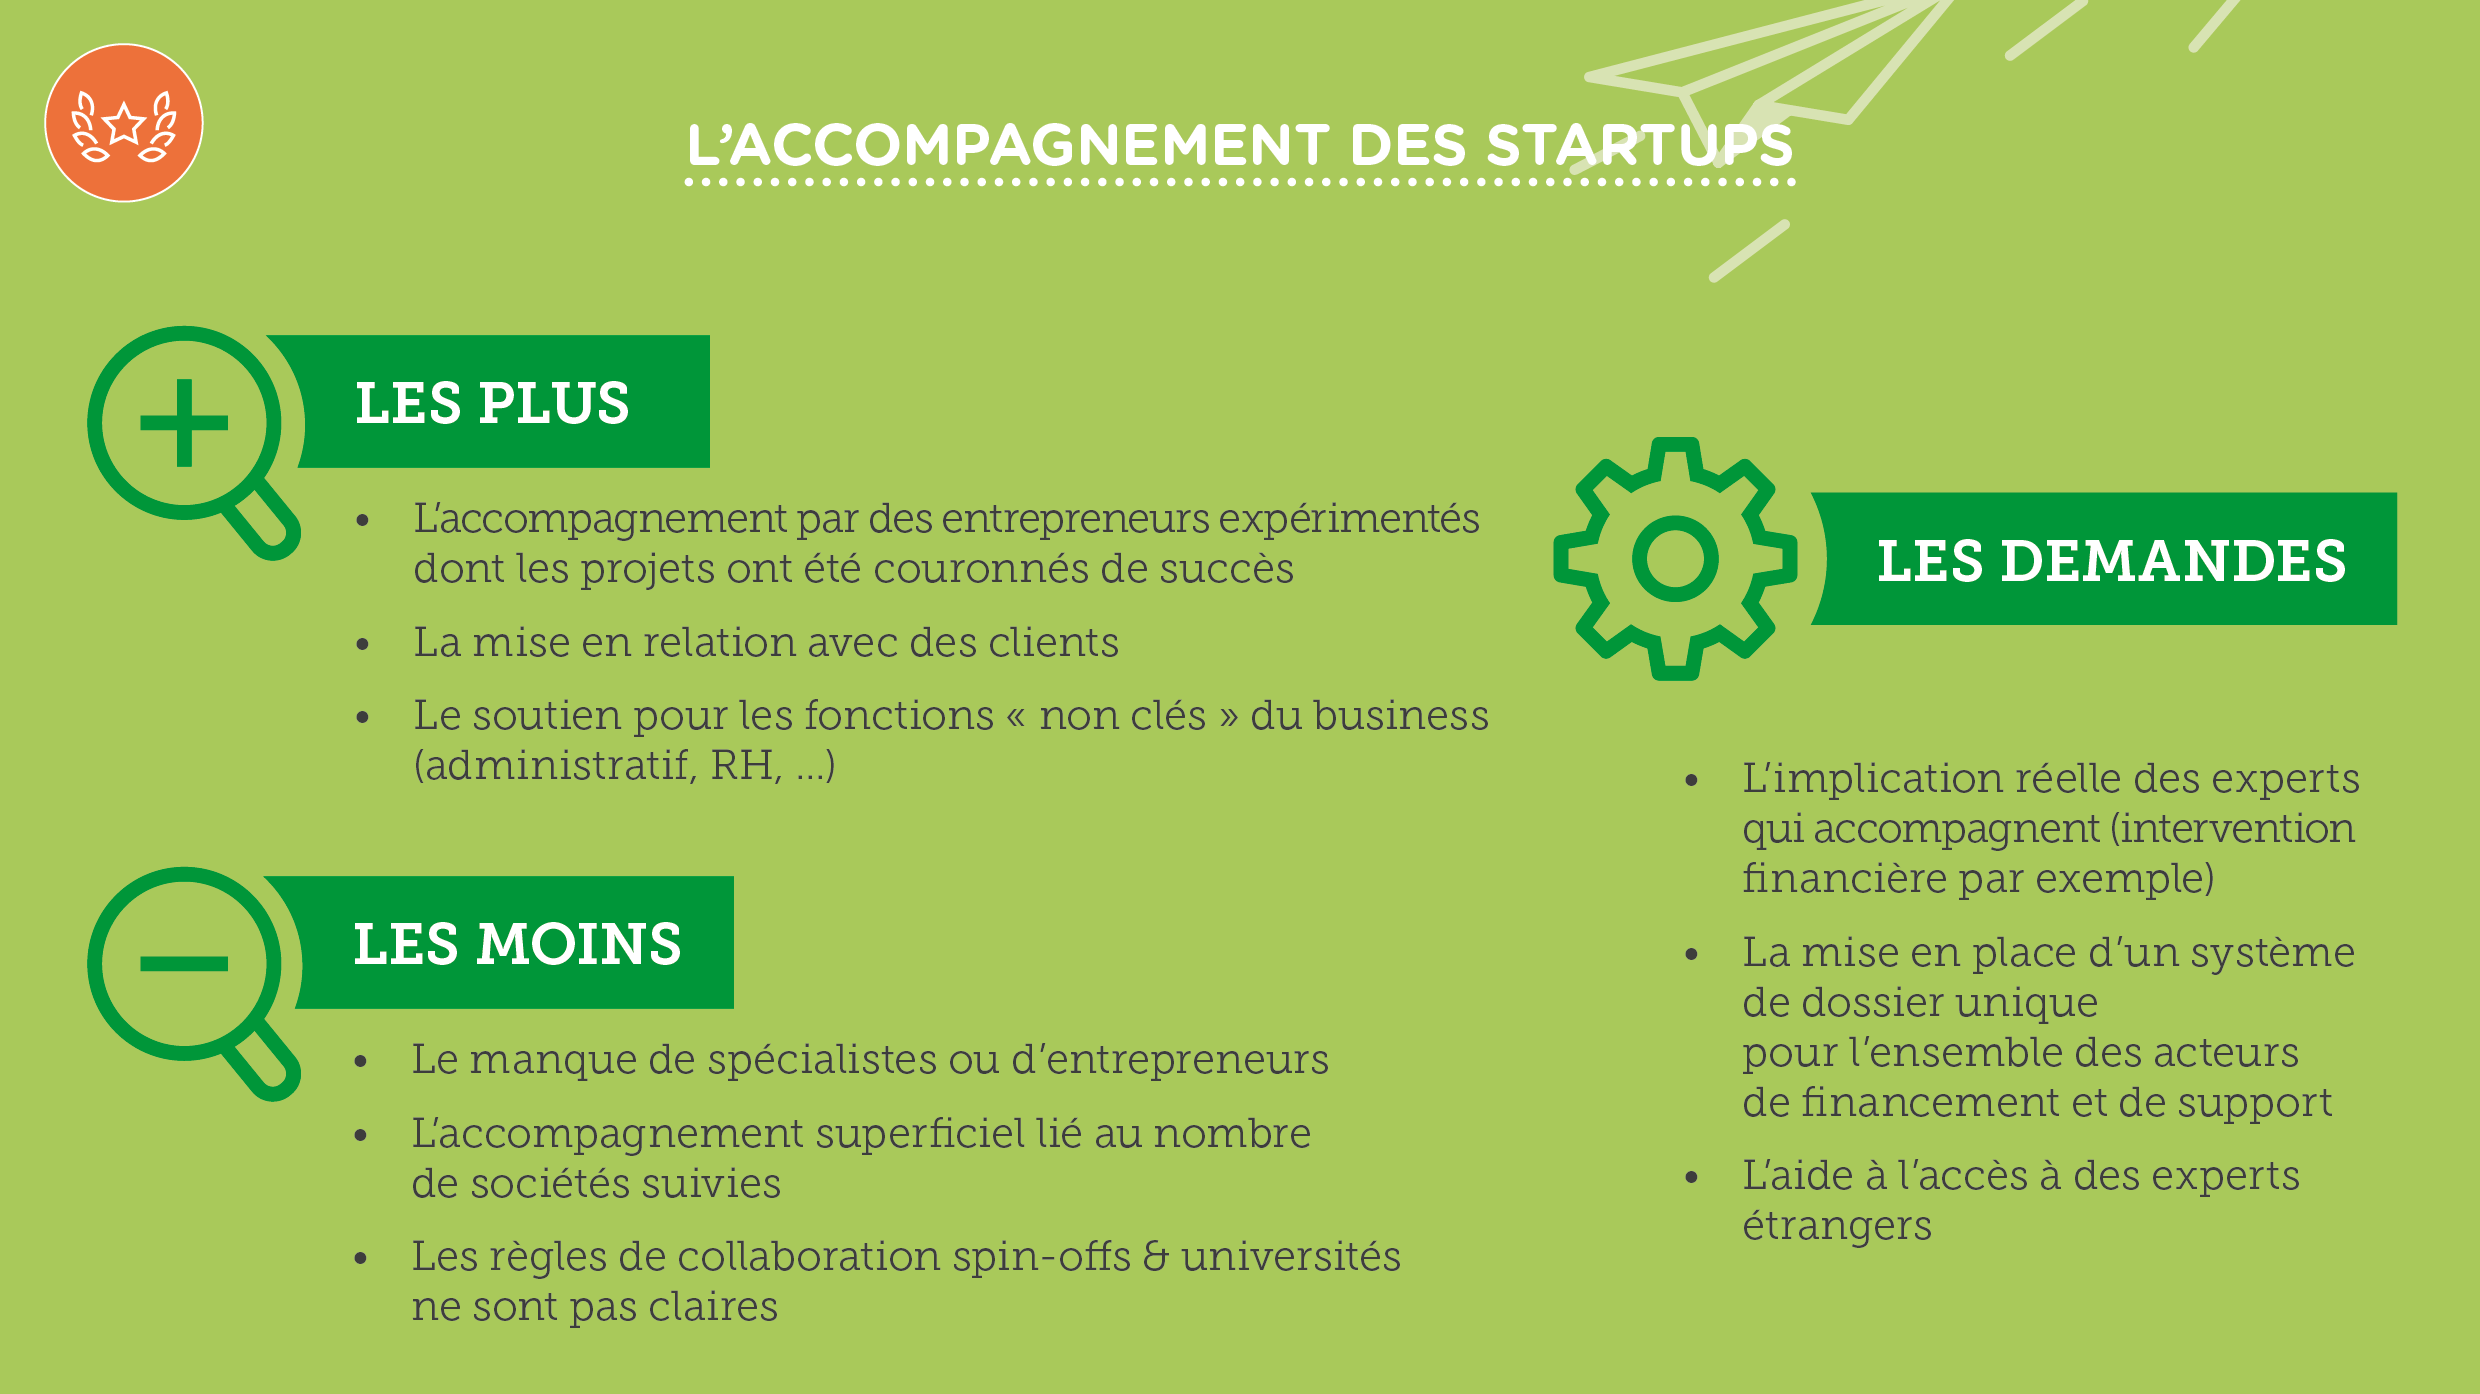 2017-Barom%C3%A8tre-Digital-Wallonia-Startups-Num%C3%A9riques-Accompagnement-Propositions.png